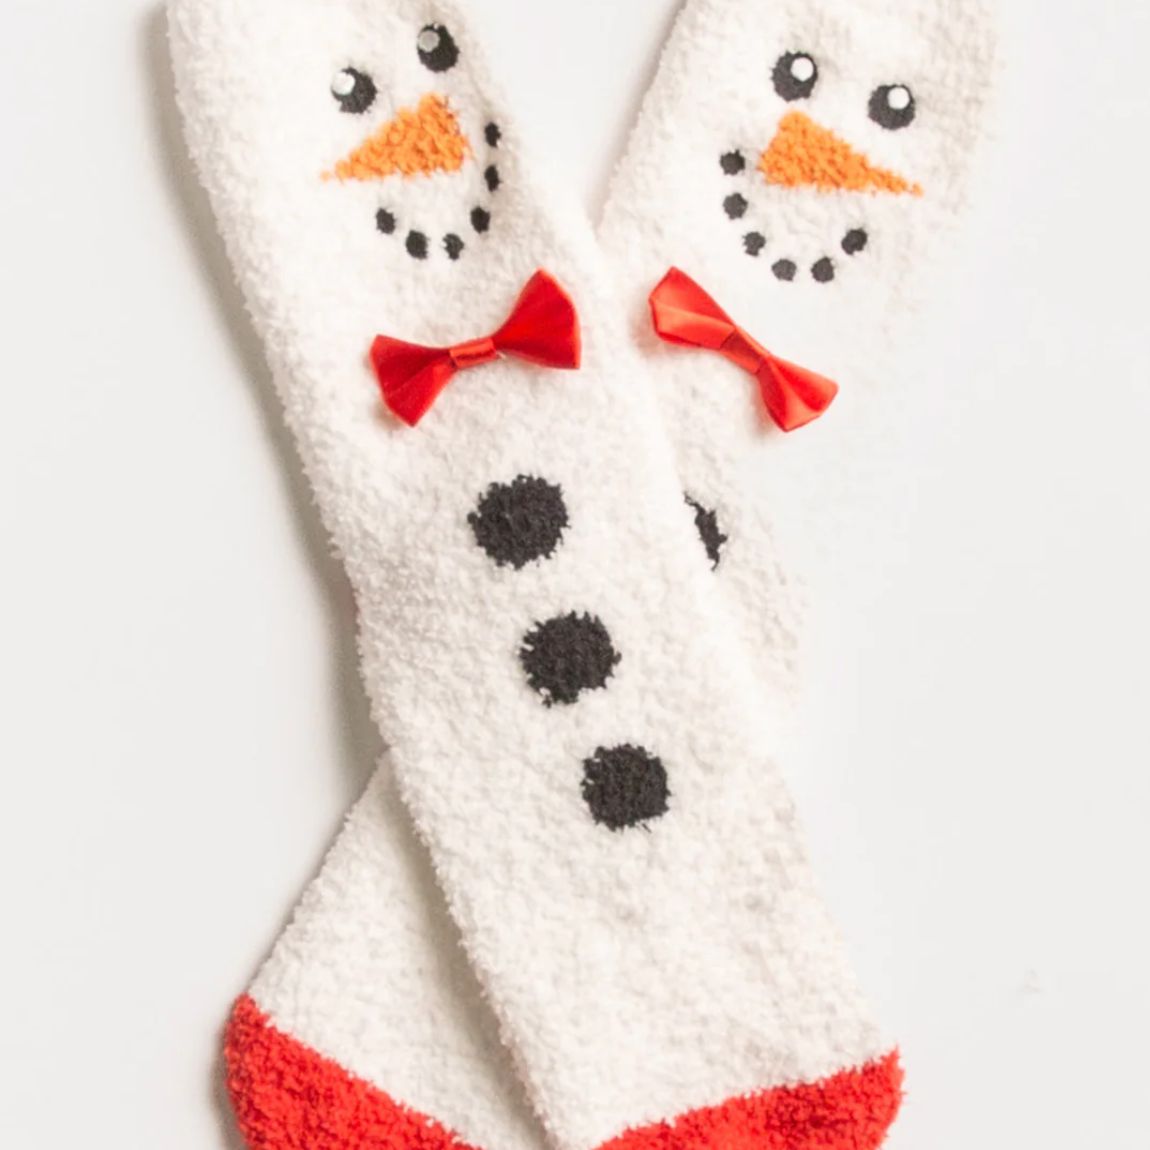 PJ Salvage Snowman Socks RLFX1-Socks & Slippers-PJ Salvage-White-One Size-Anna Bella Fine Lingerie, Reveal Your Most Gorgeous Self!